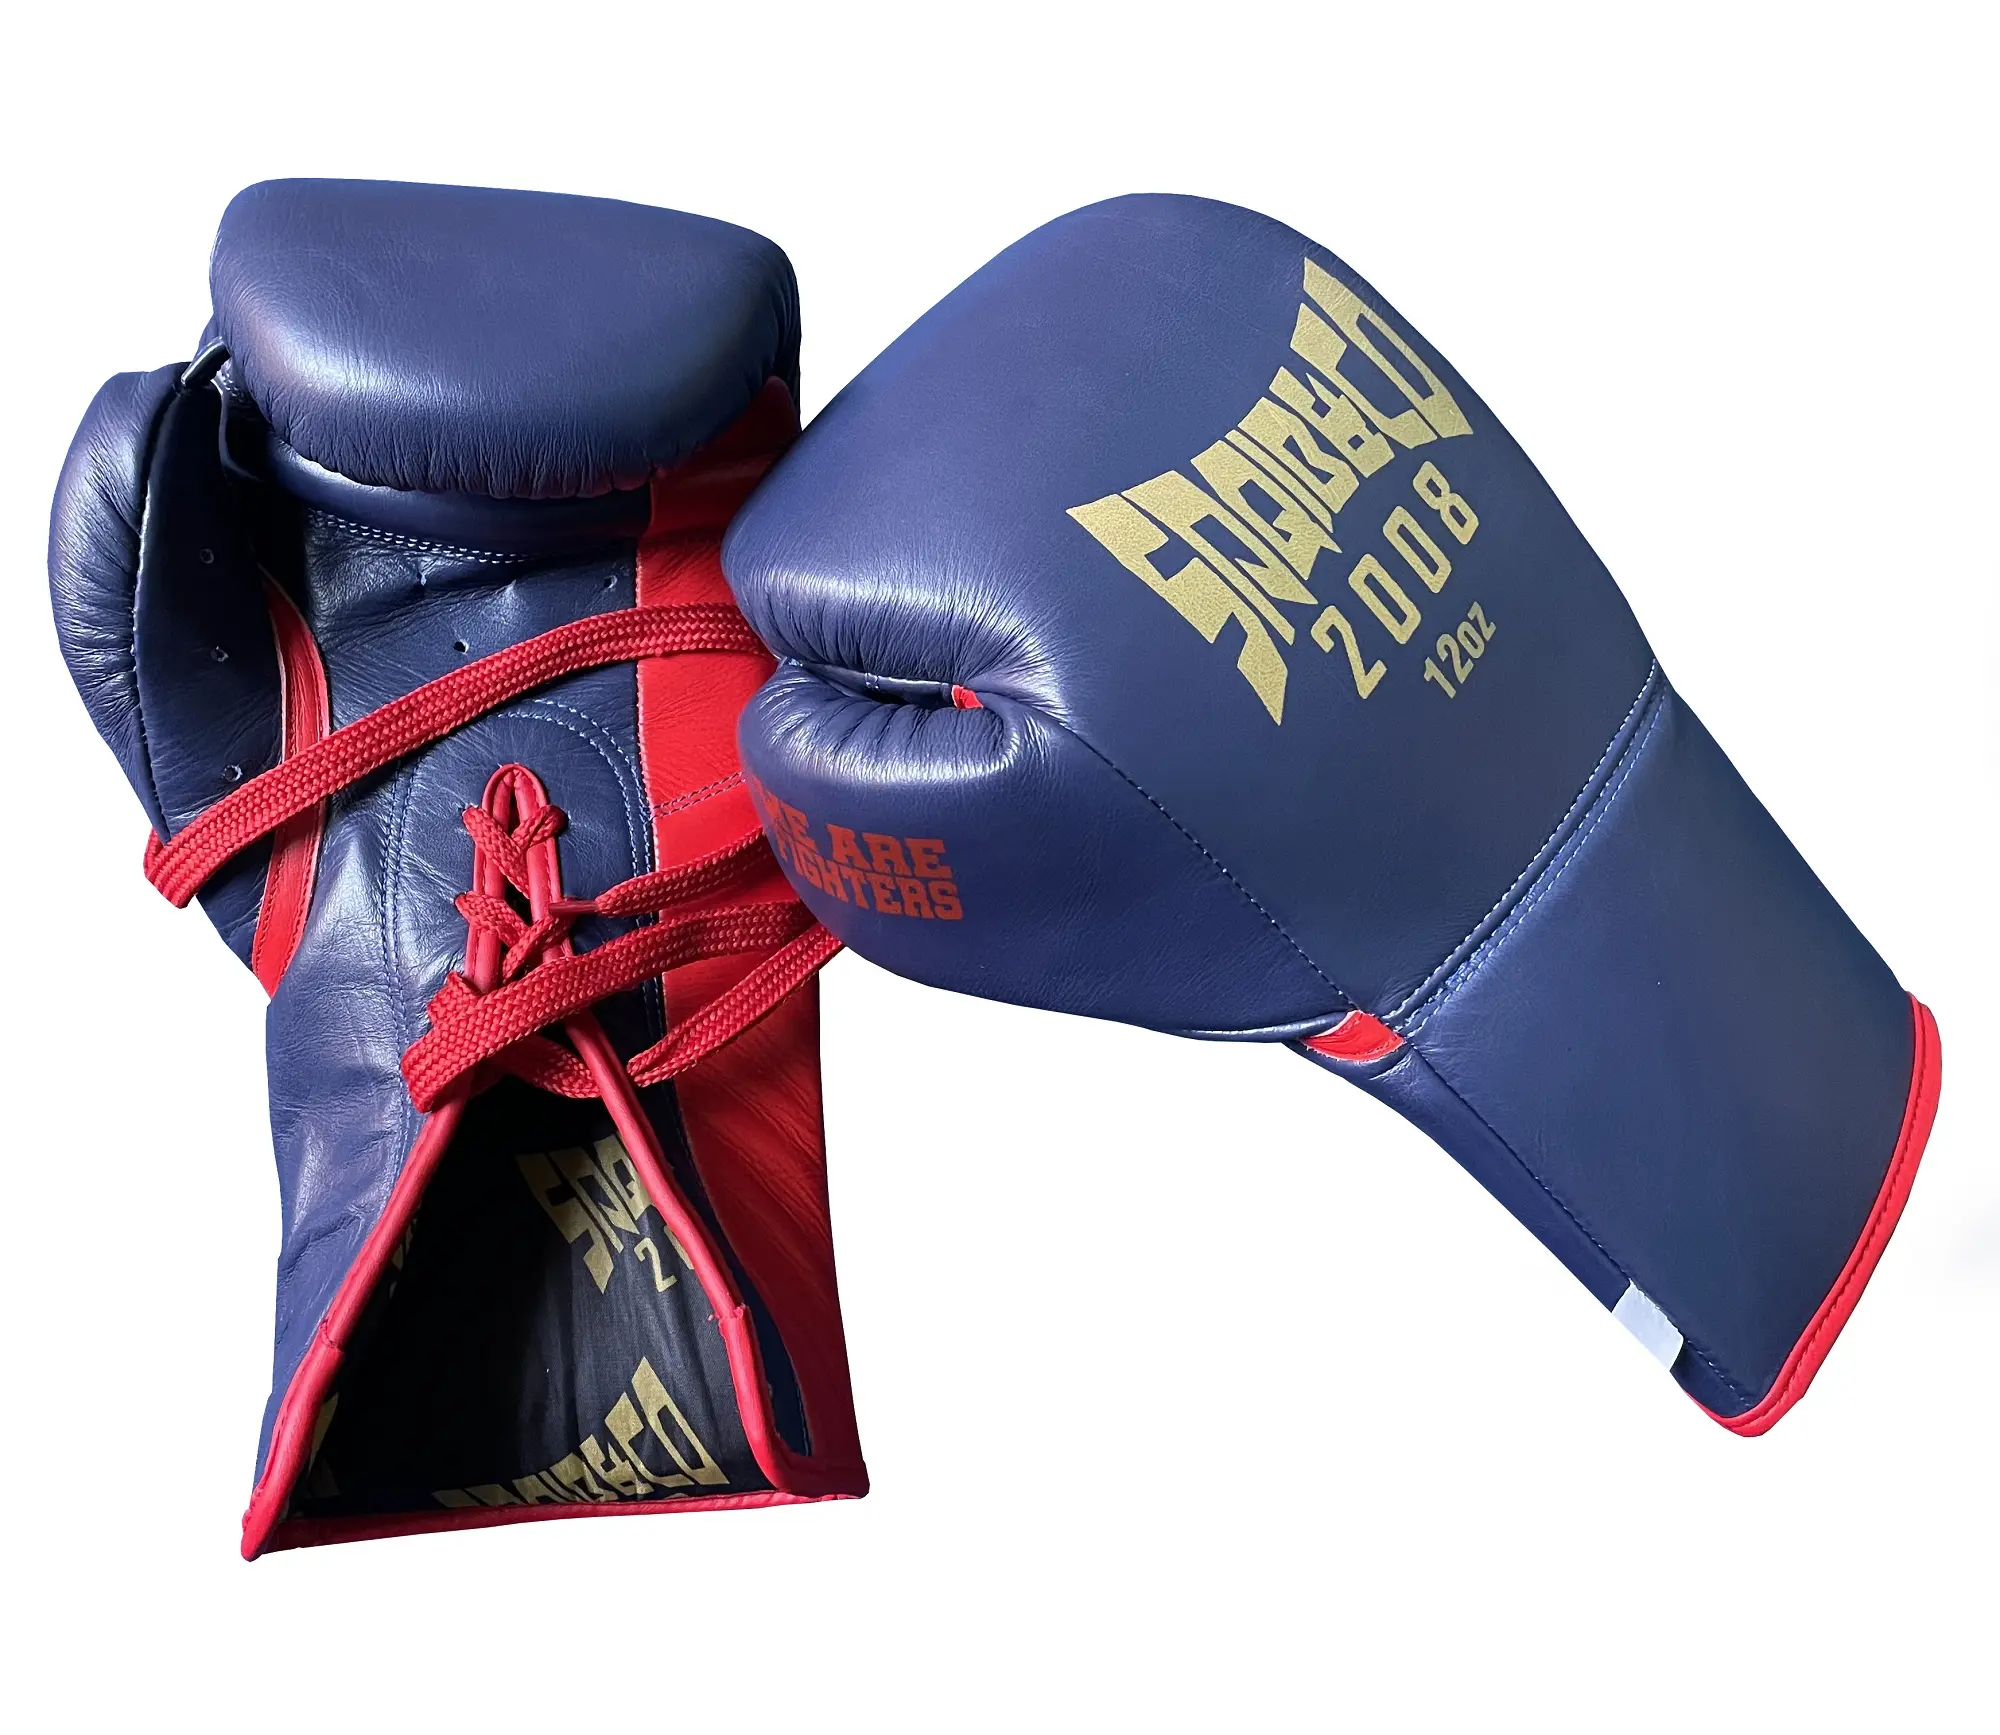 Sparring Gloves, Lace Up Boxing Gloves & Punching Bag Gloves & Boxing Gloves